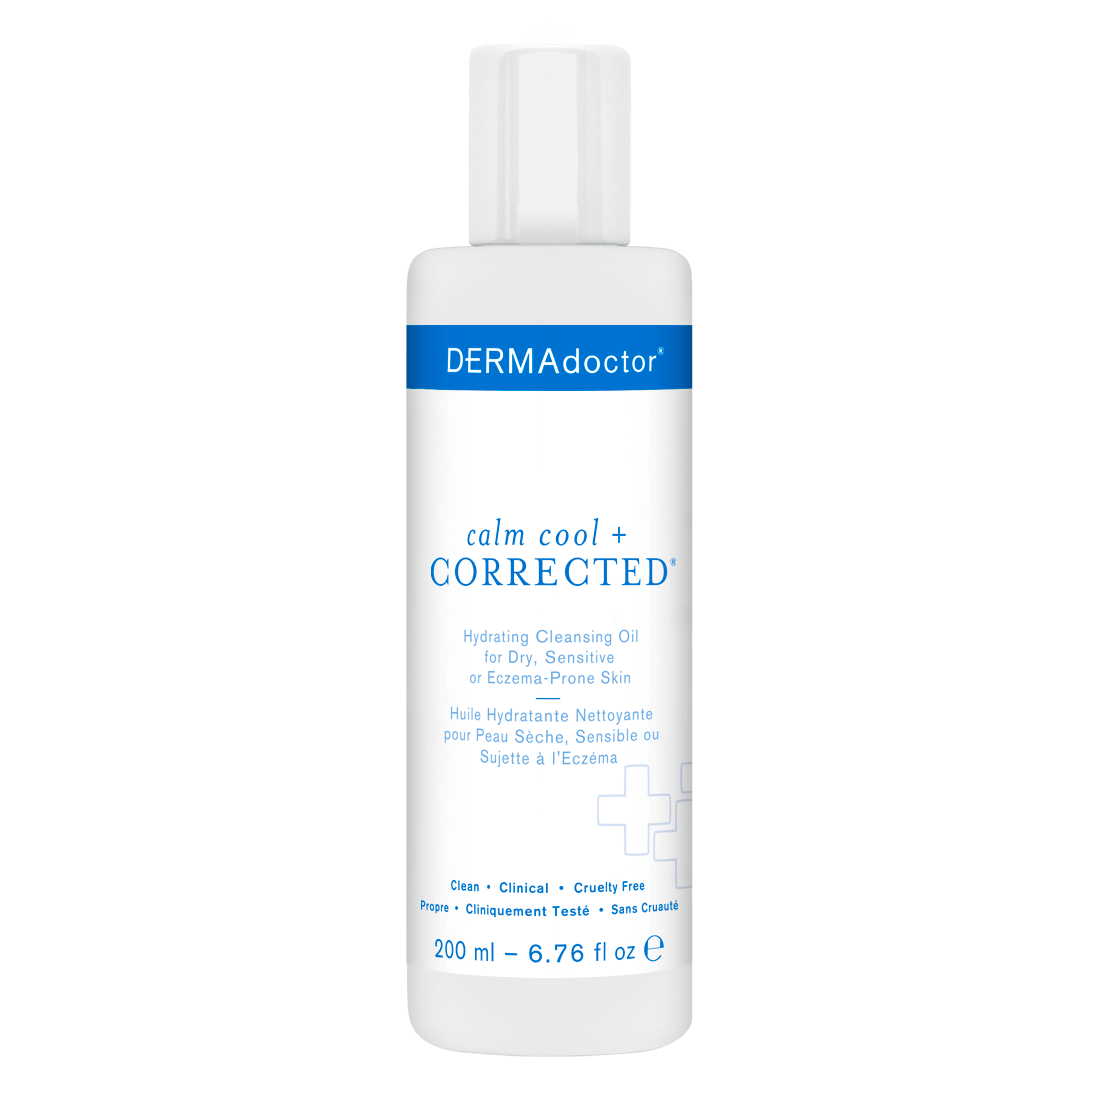 Calm Cool + Corrected Hydrating Cleansing Oil, Moisturizer and Makeup Remover for Dry, Sensitive or 